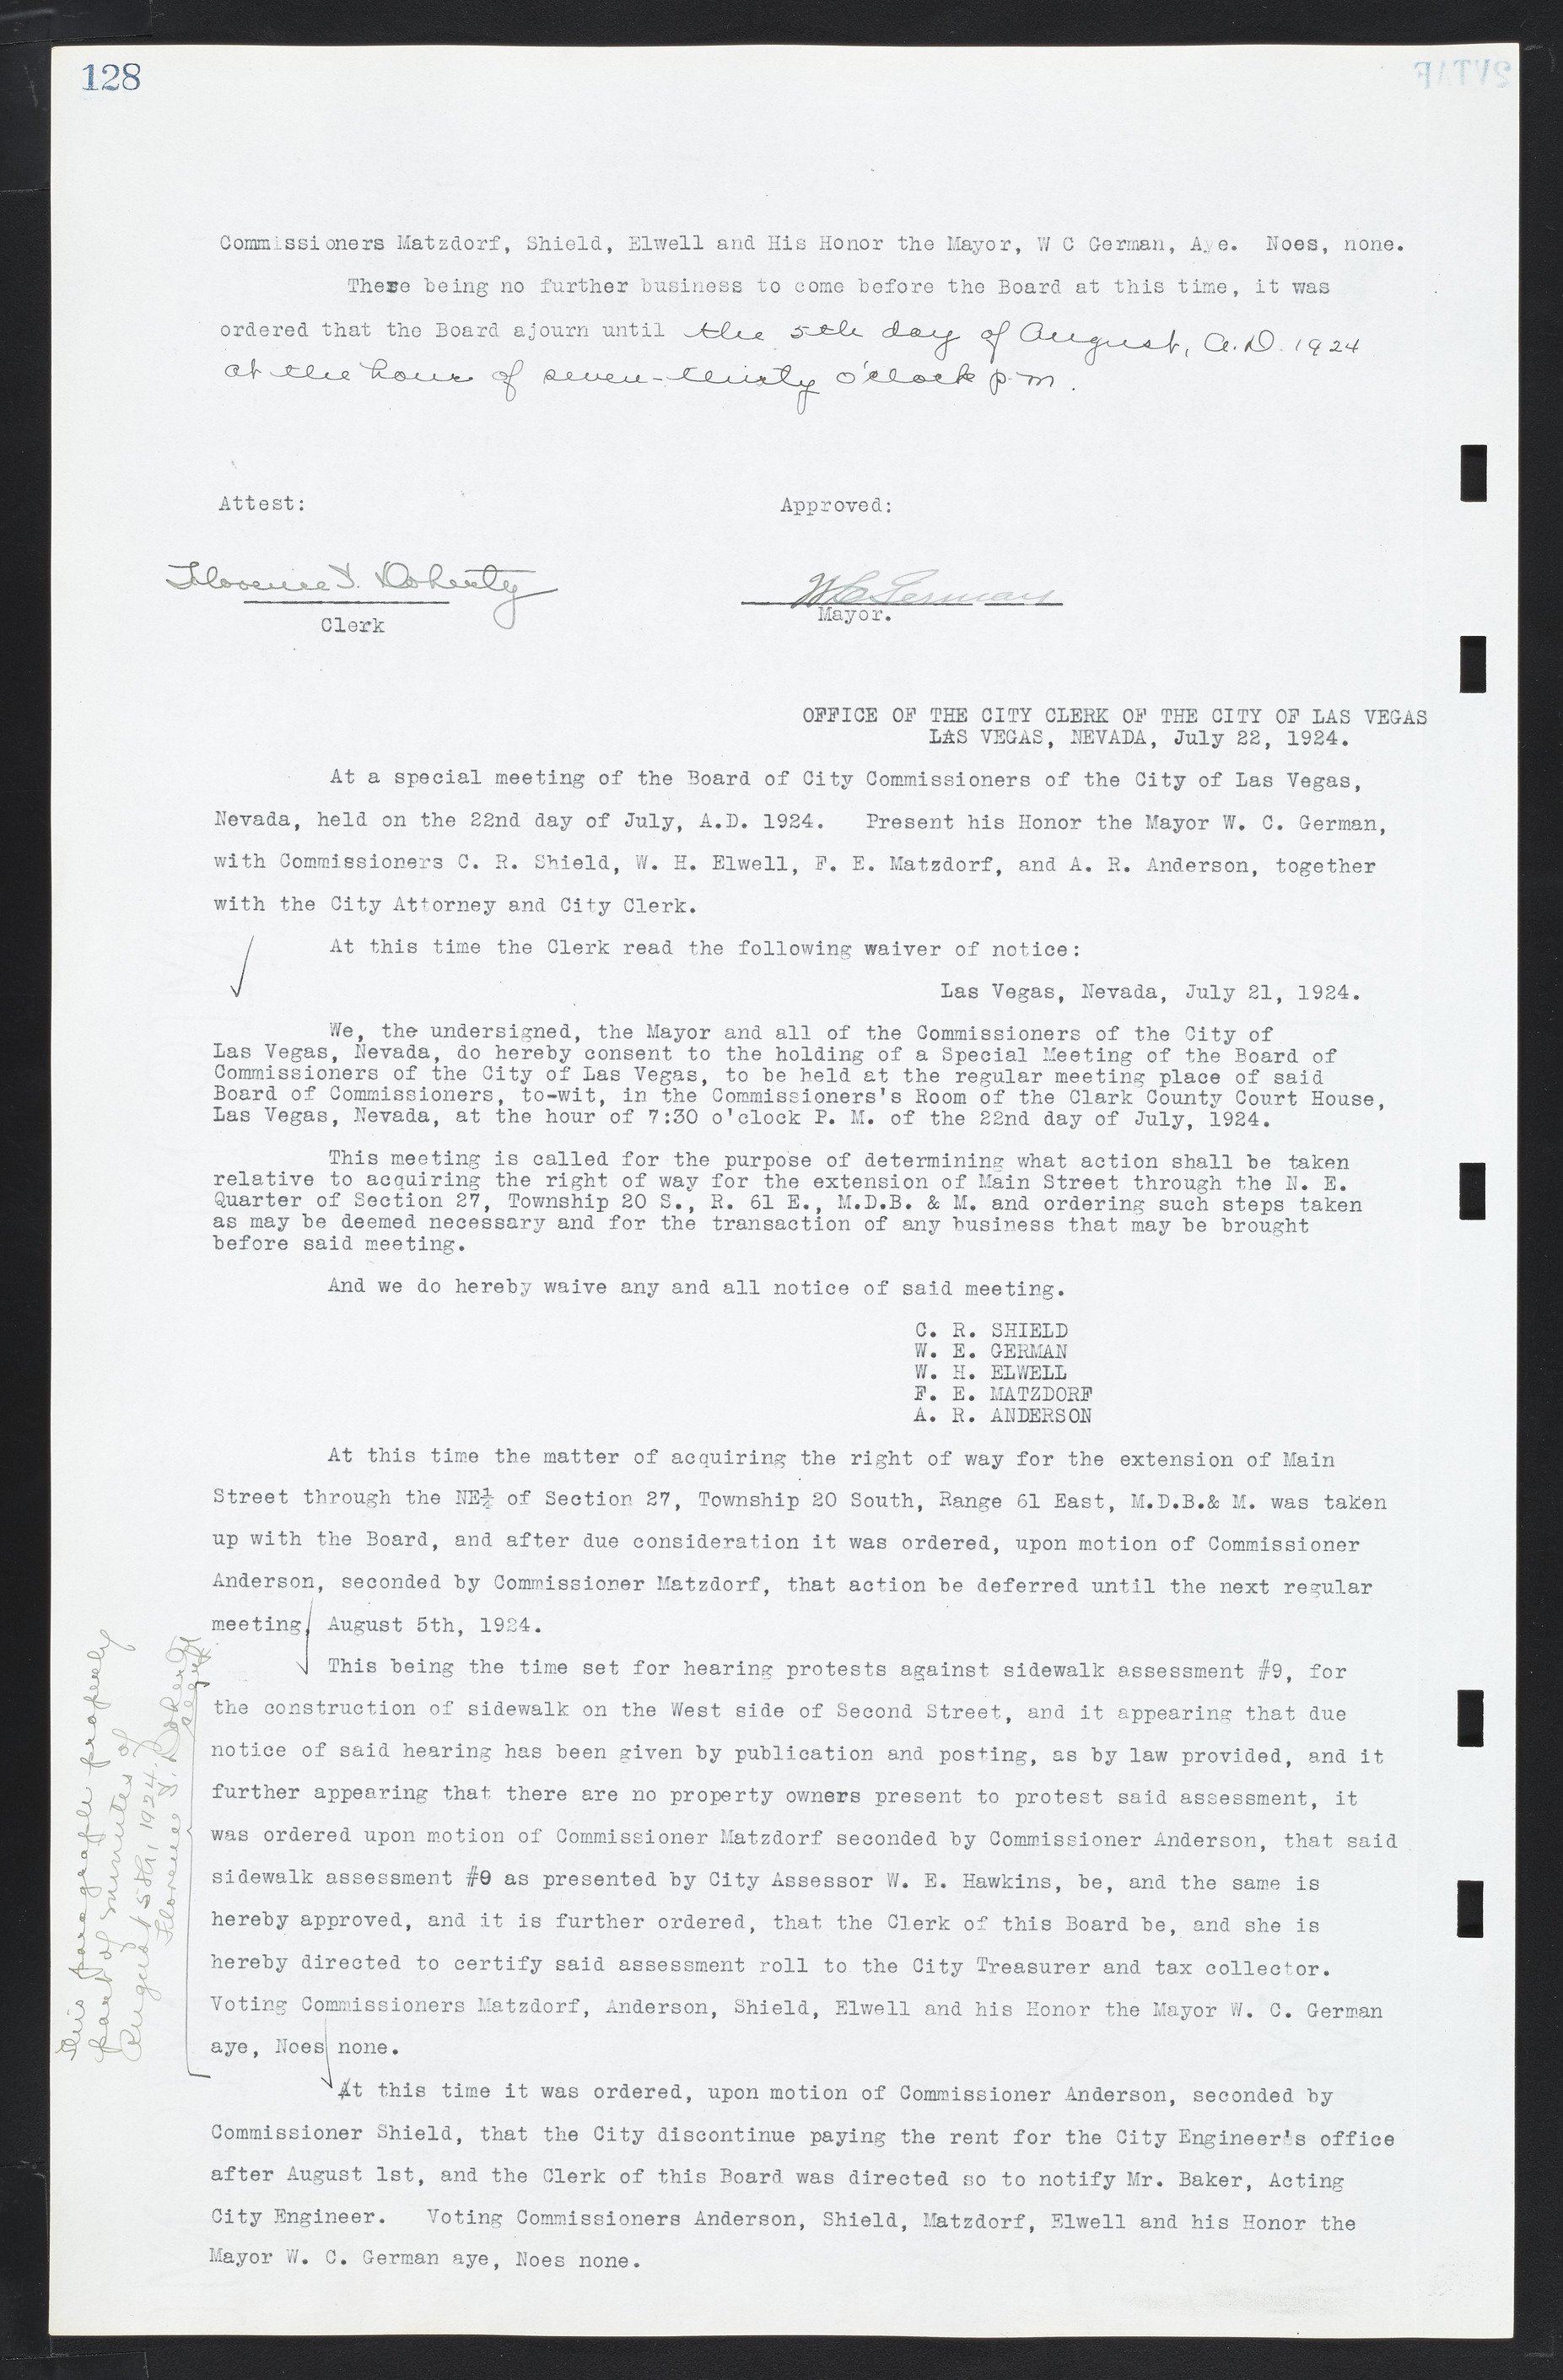 Las Vegas City Commission Minutes, March 1, 1922 to May 10, 1929, lvc000002-135